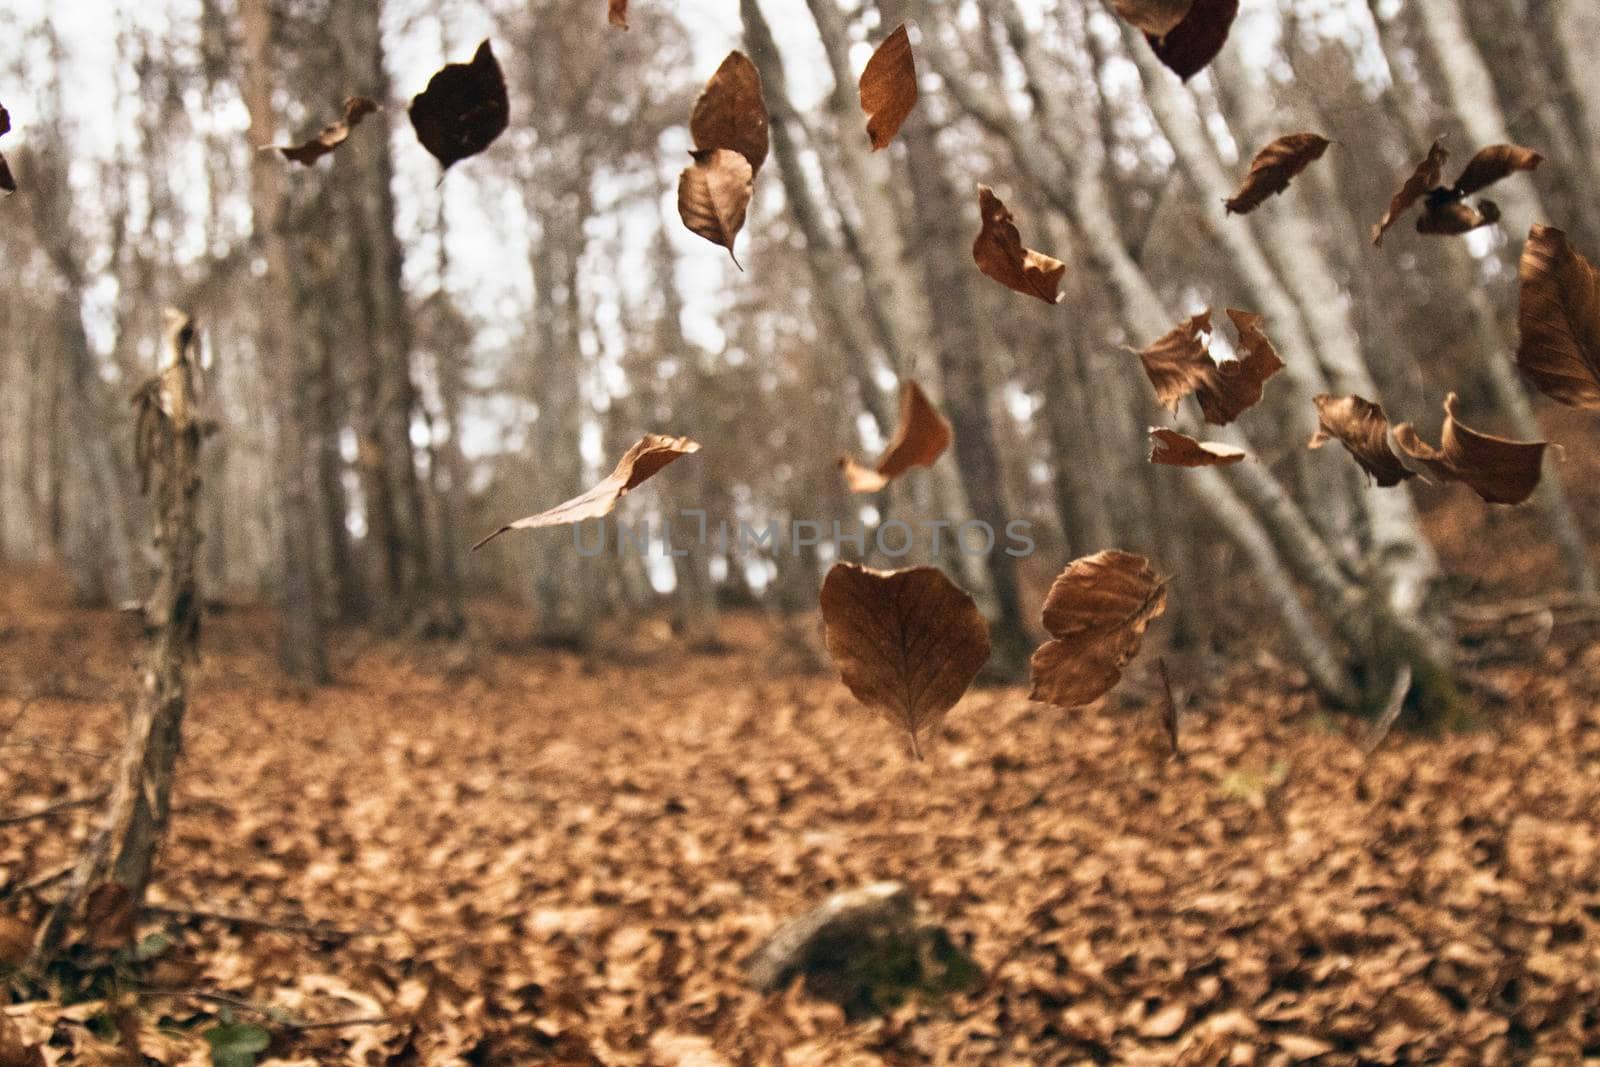 Leaves falling from some trees in a forest in autumn